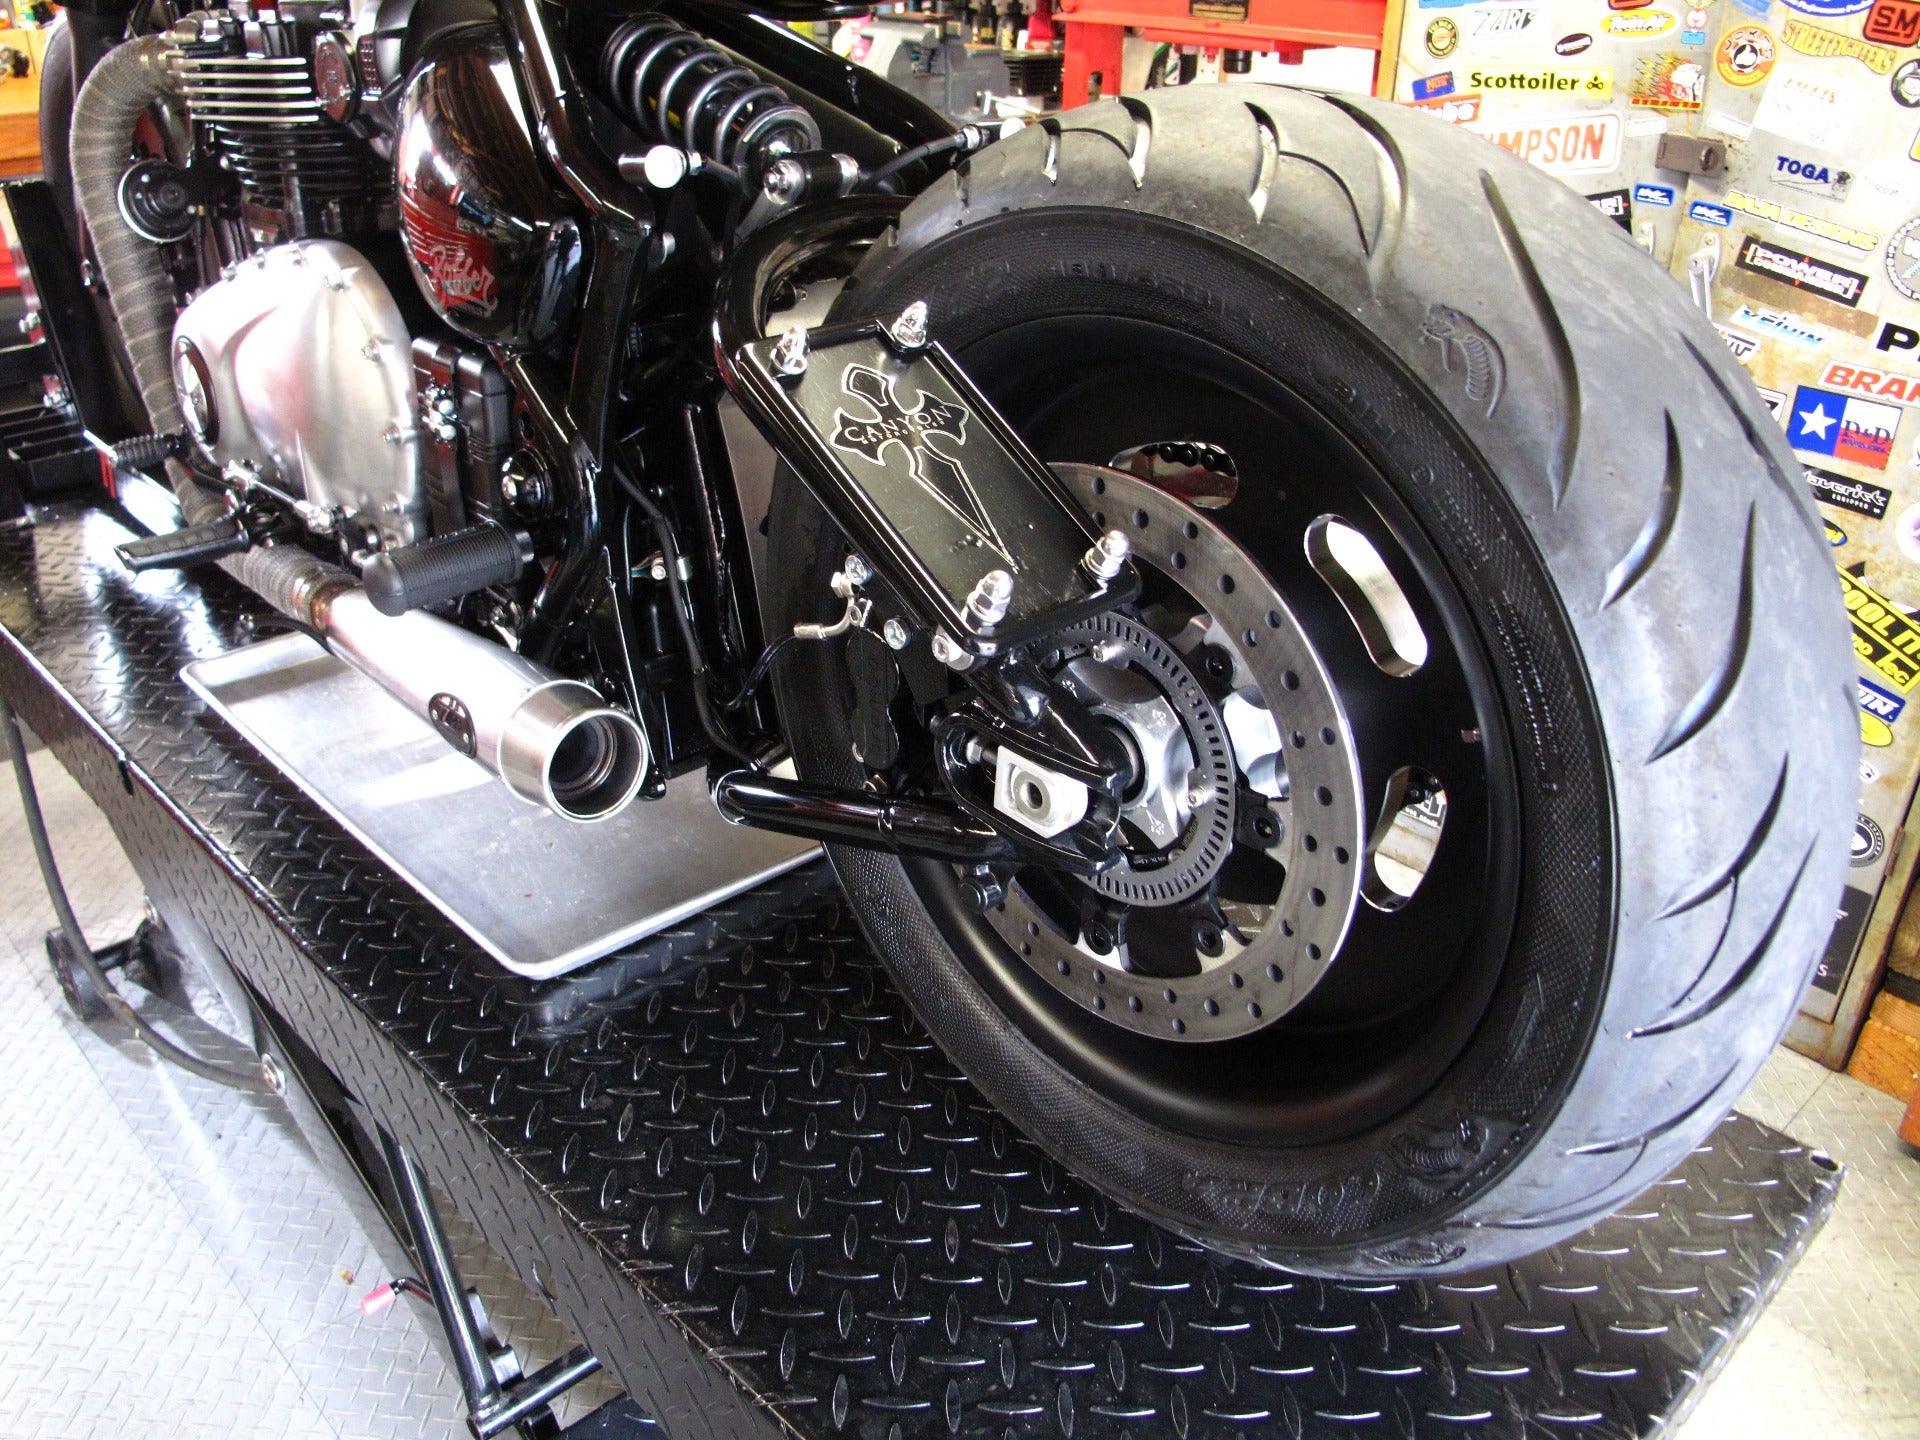 Moon Slot Wheel Kit - Stage 2 - Any Size, Any Custom Finish with Tires of your choice! Deposit.